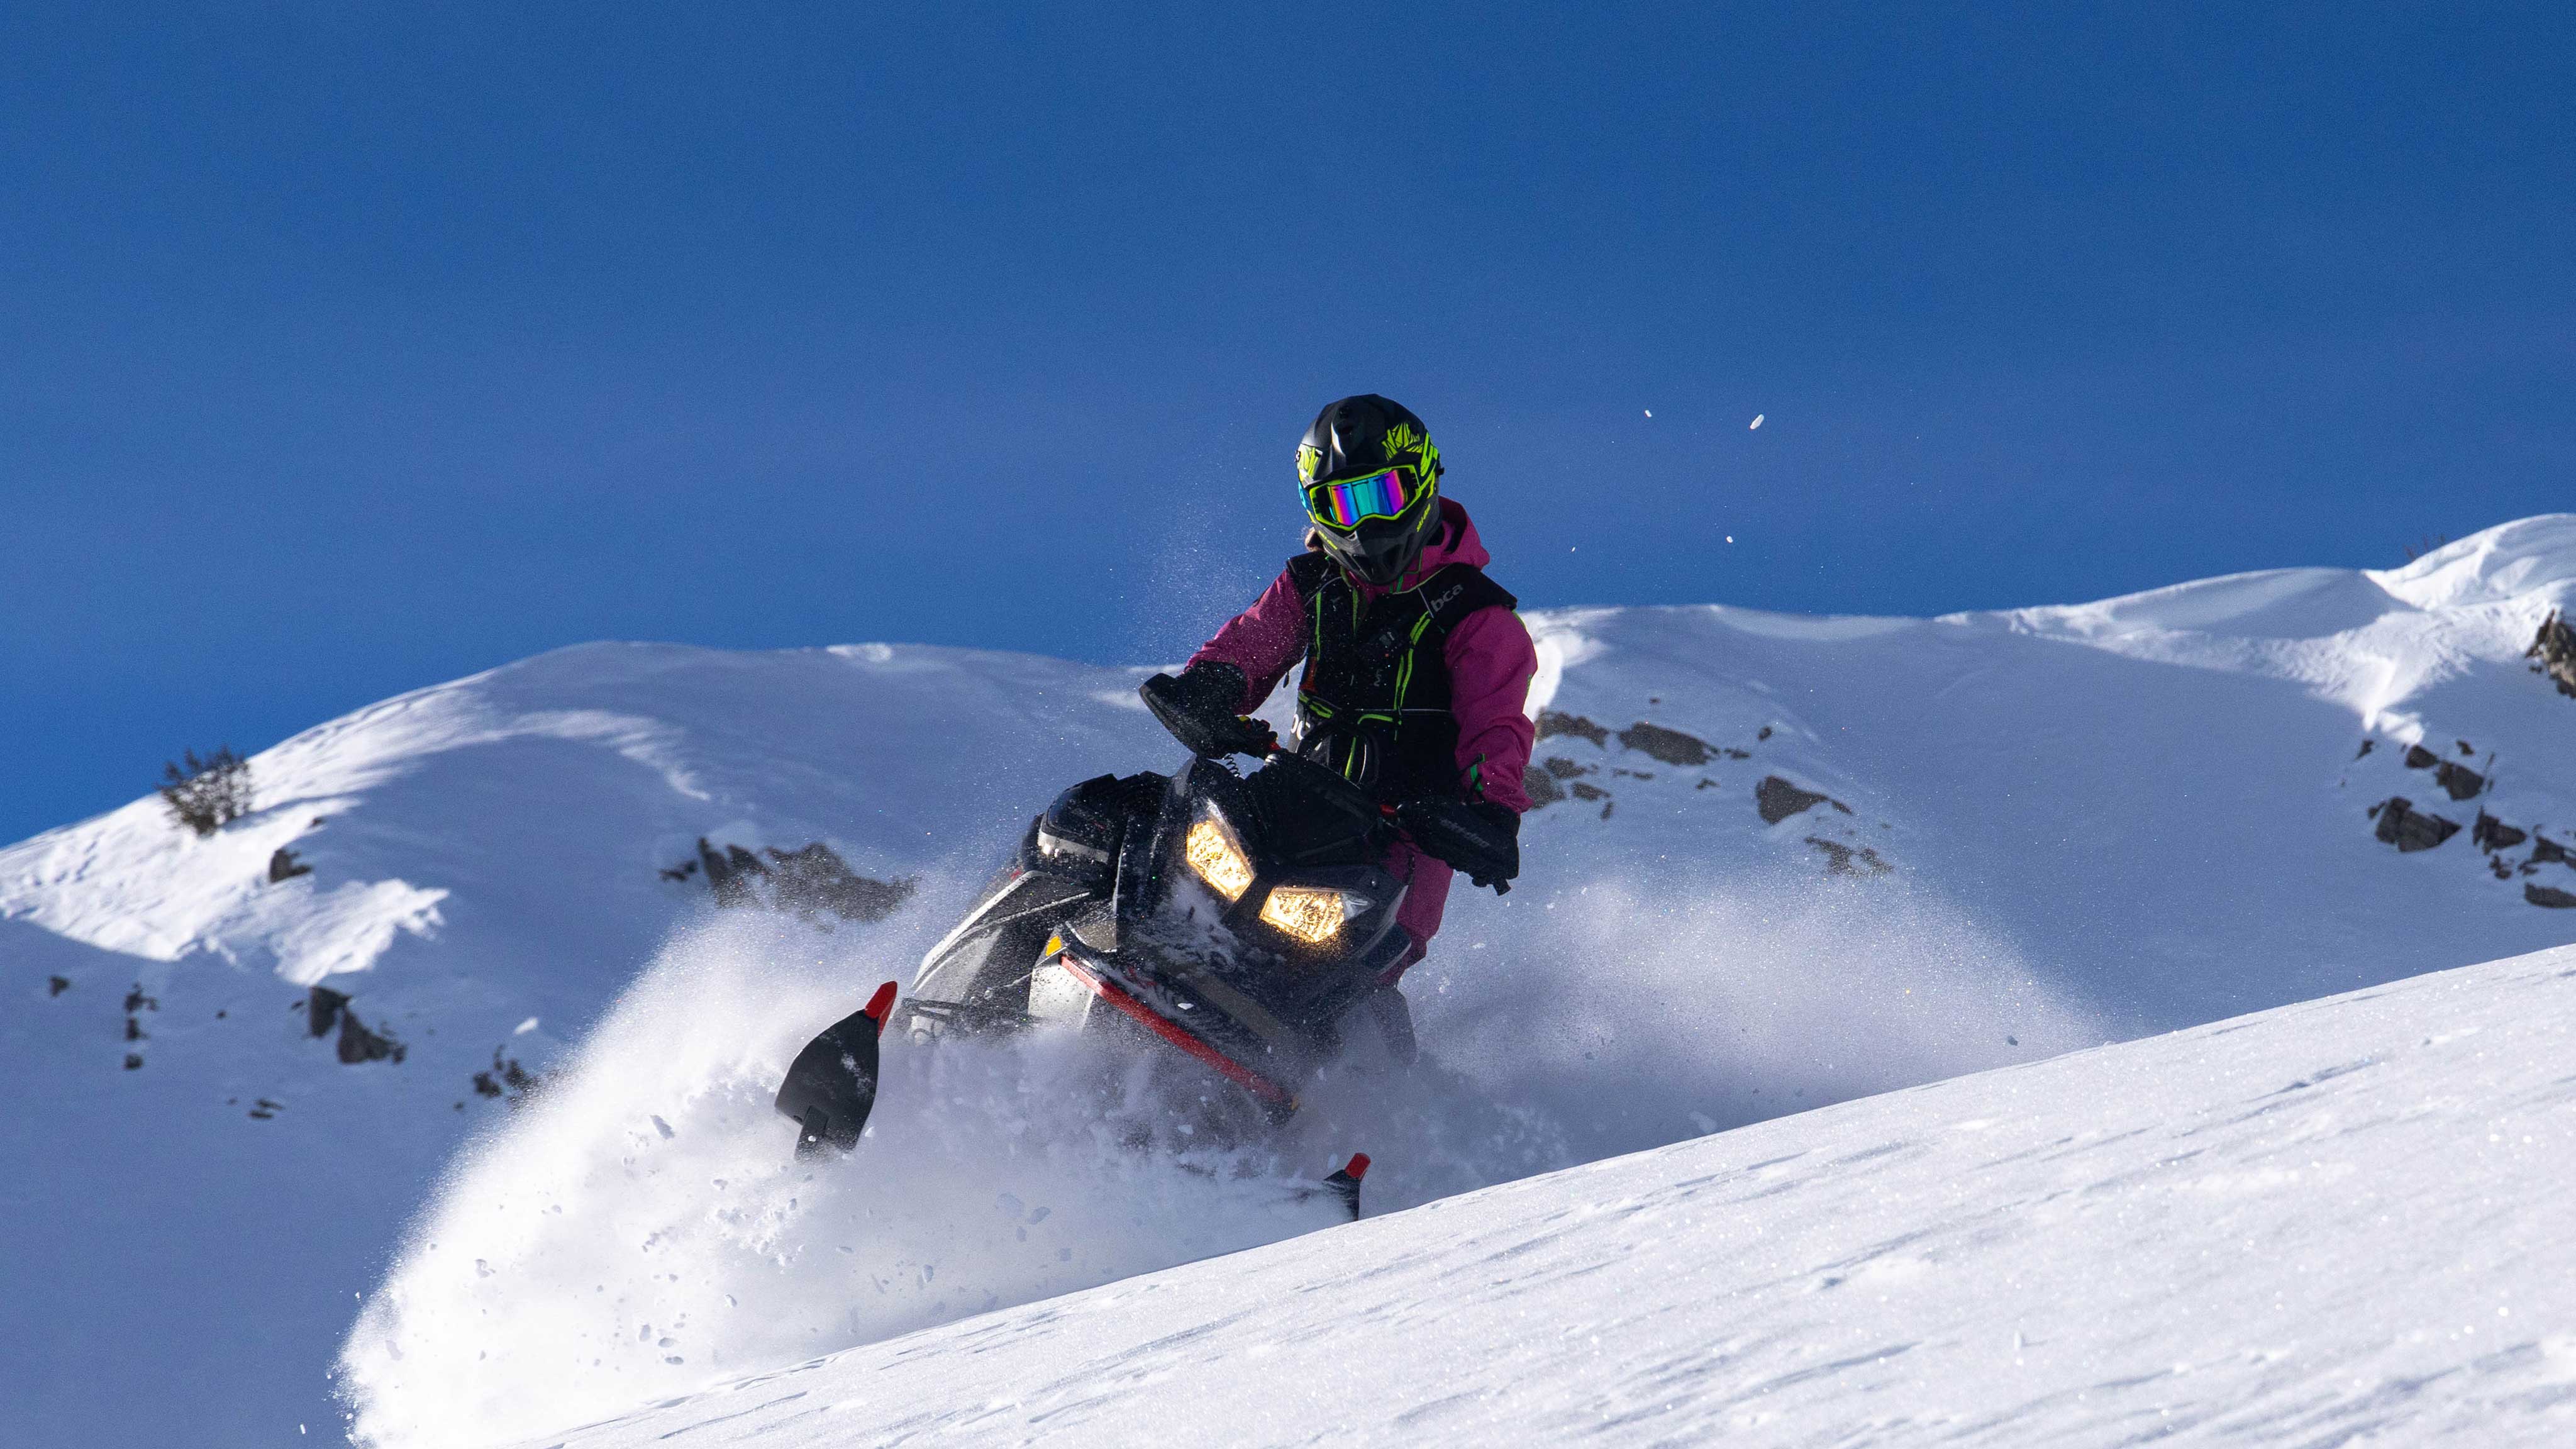 Lisa Granden on riding in deep snow with her Ski-Doo Summit